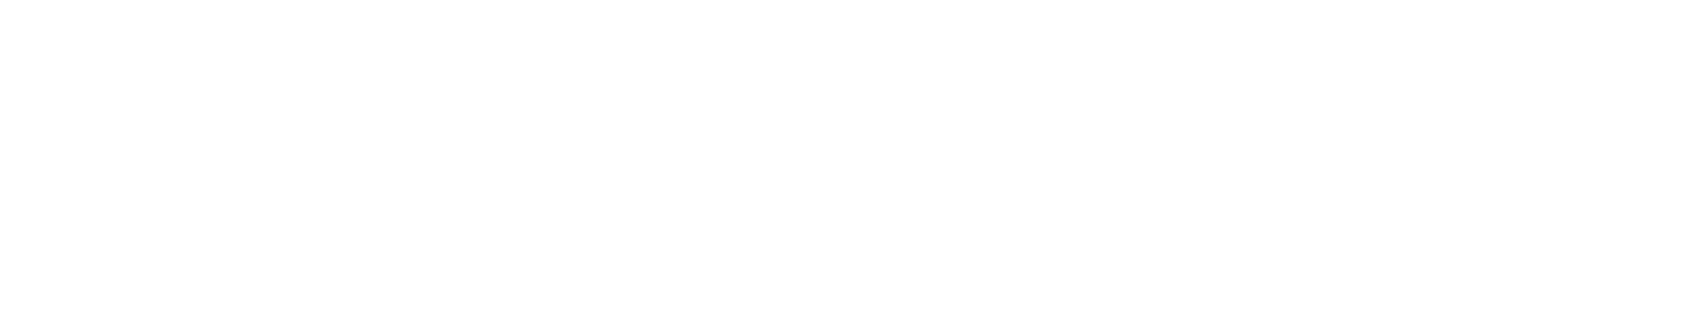 Kulicke and Soffa Industries logo large for dark backgrounds (transparent PNG)